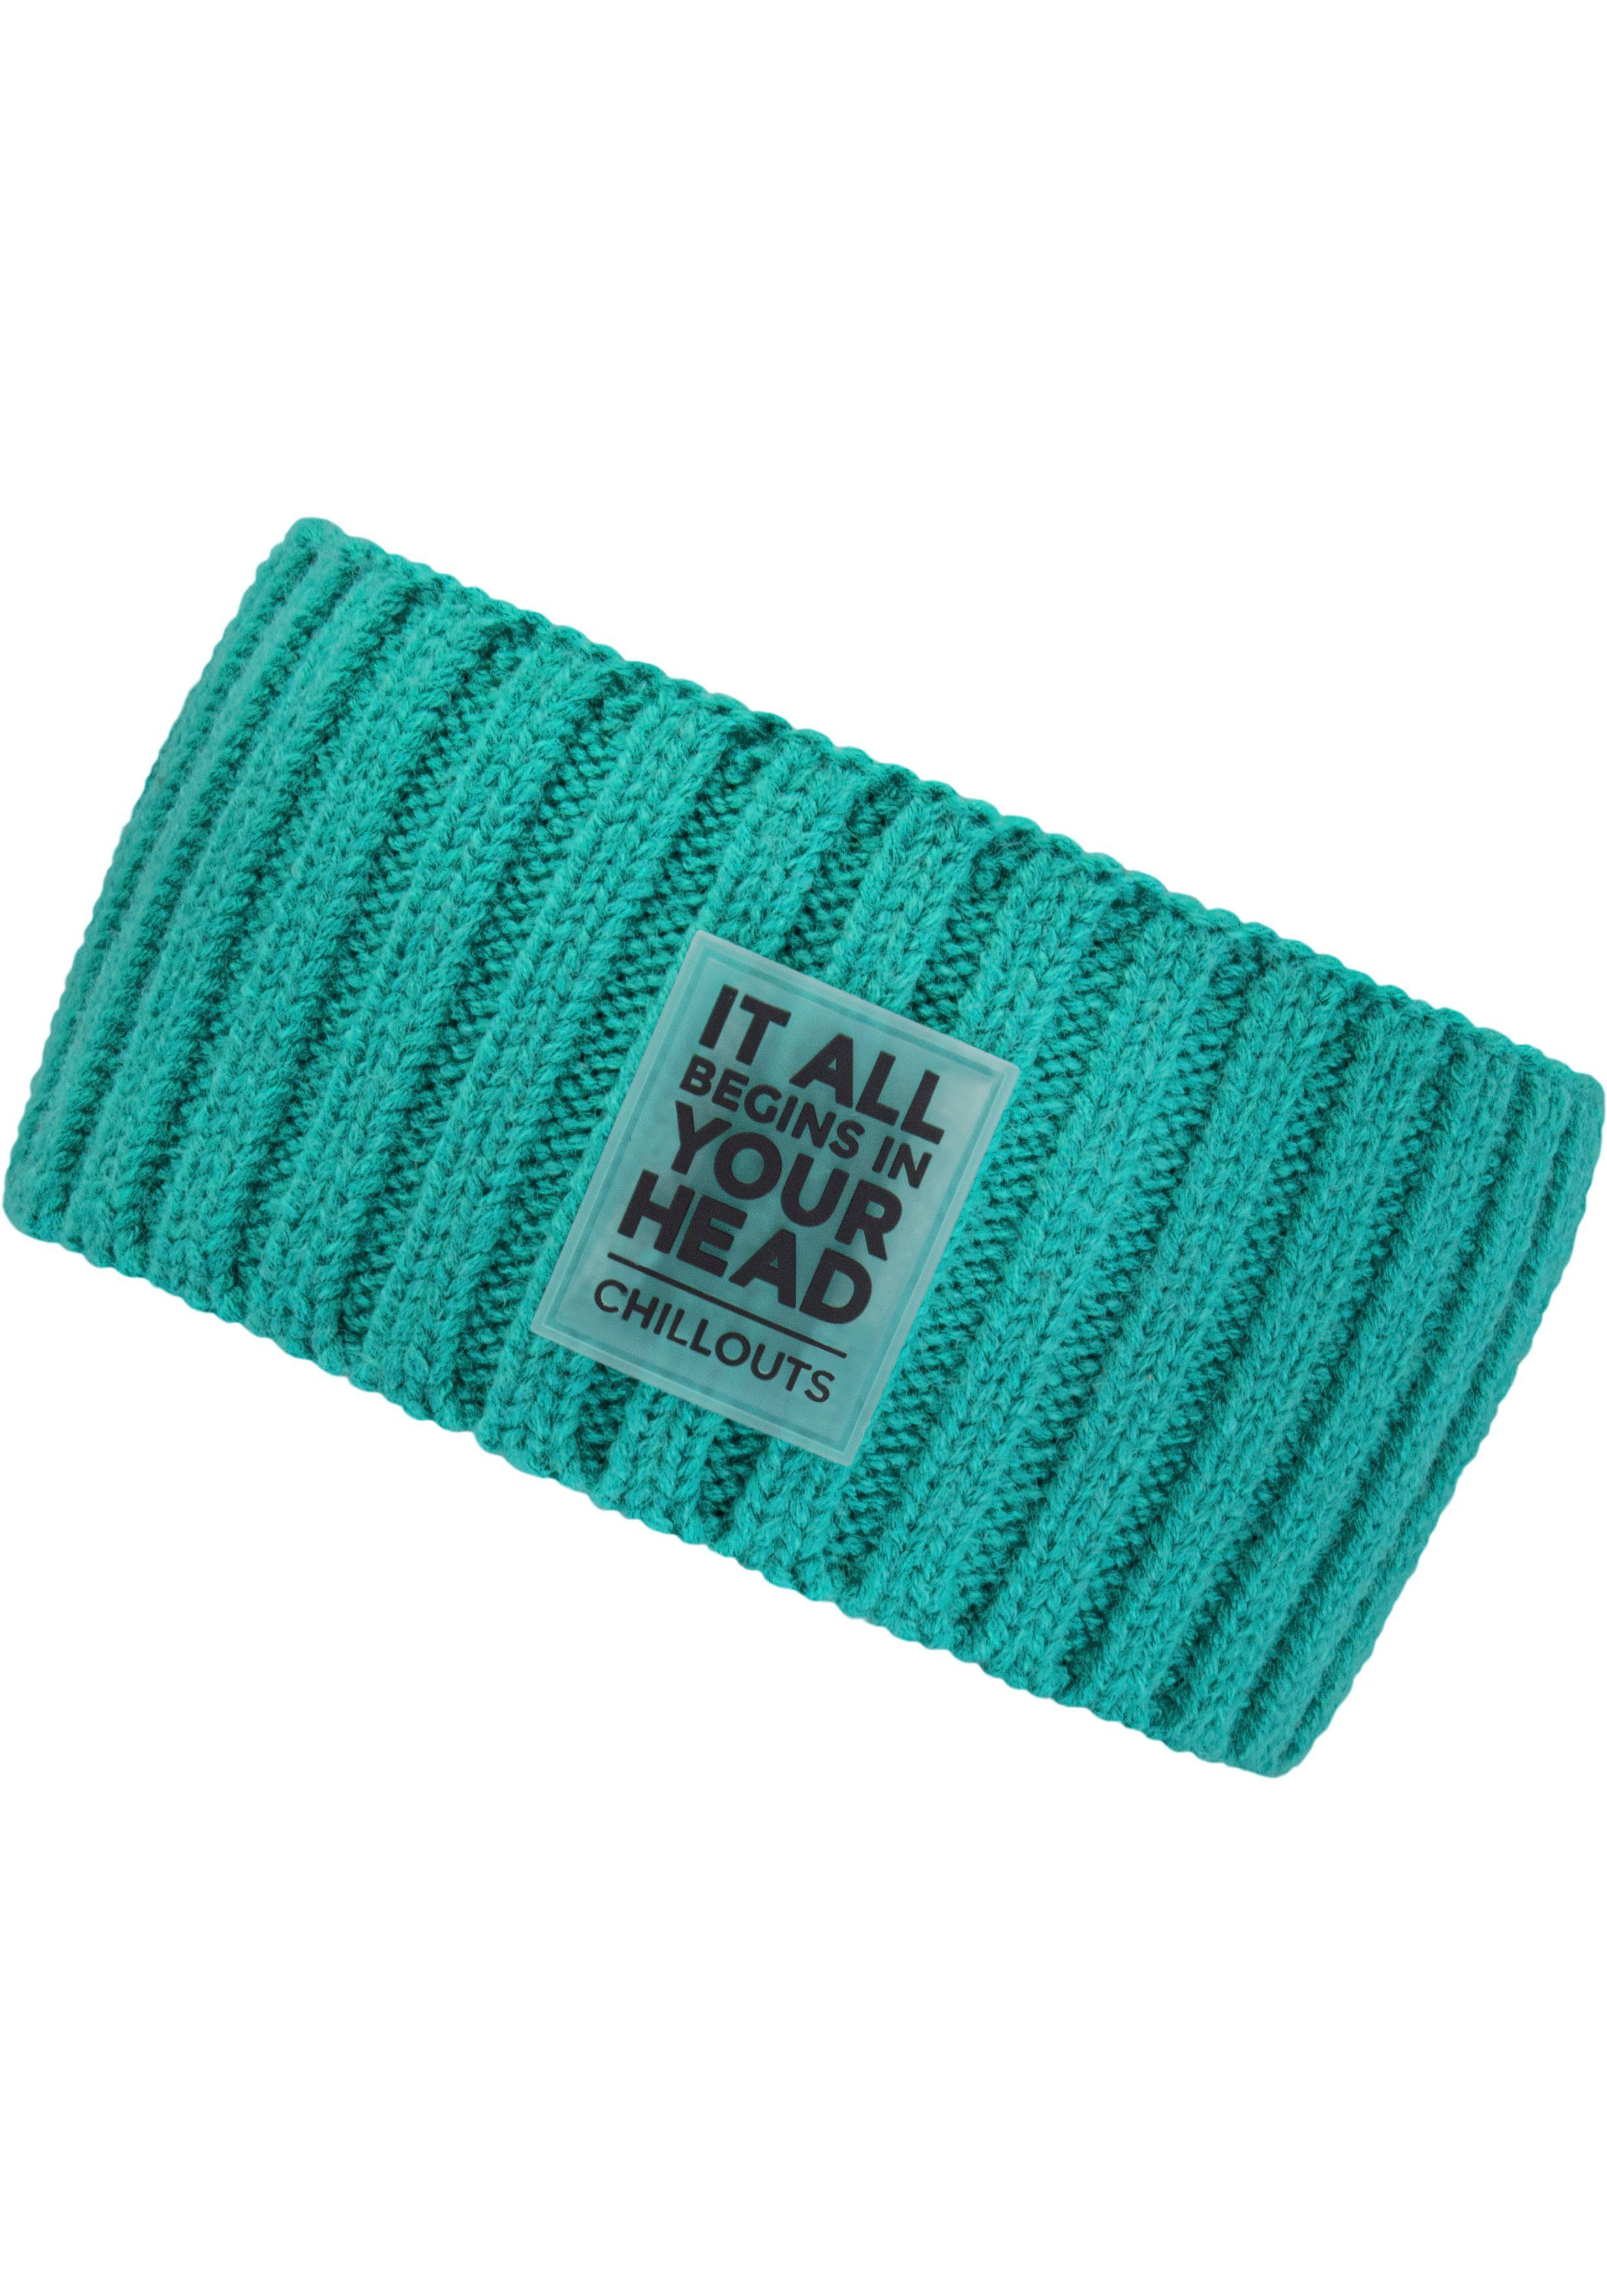 Trendiges chillouts Zoe Stirnband turquoise Headband Design